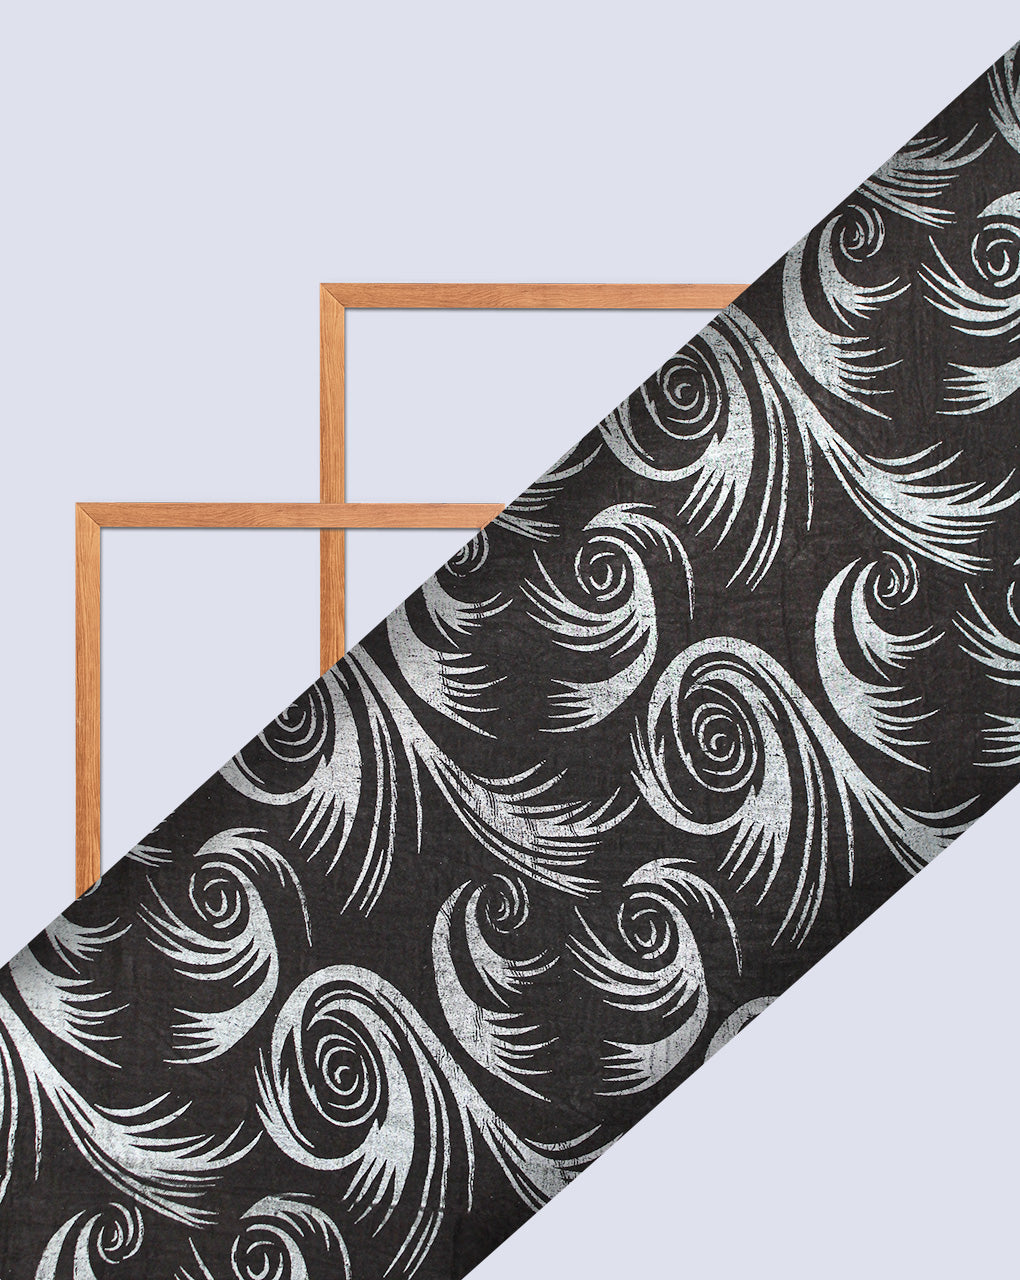 DARK BROWN ABSTRACT DESIGN POLYESTER SATIN PRINTED FABRIC